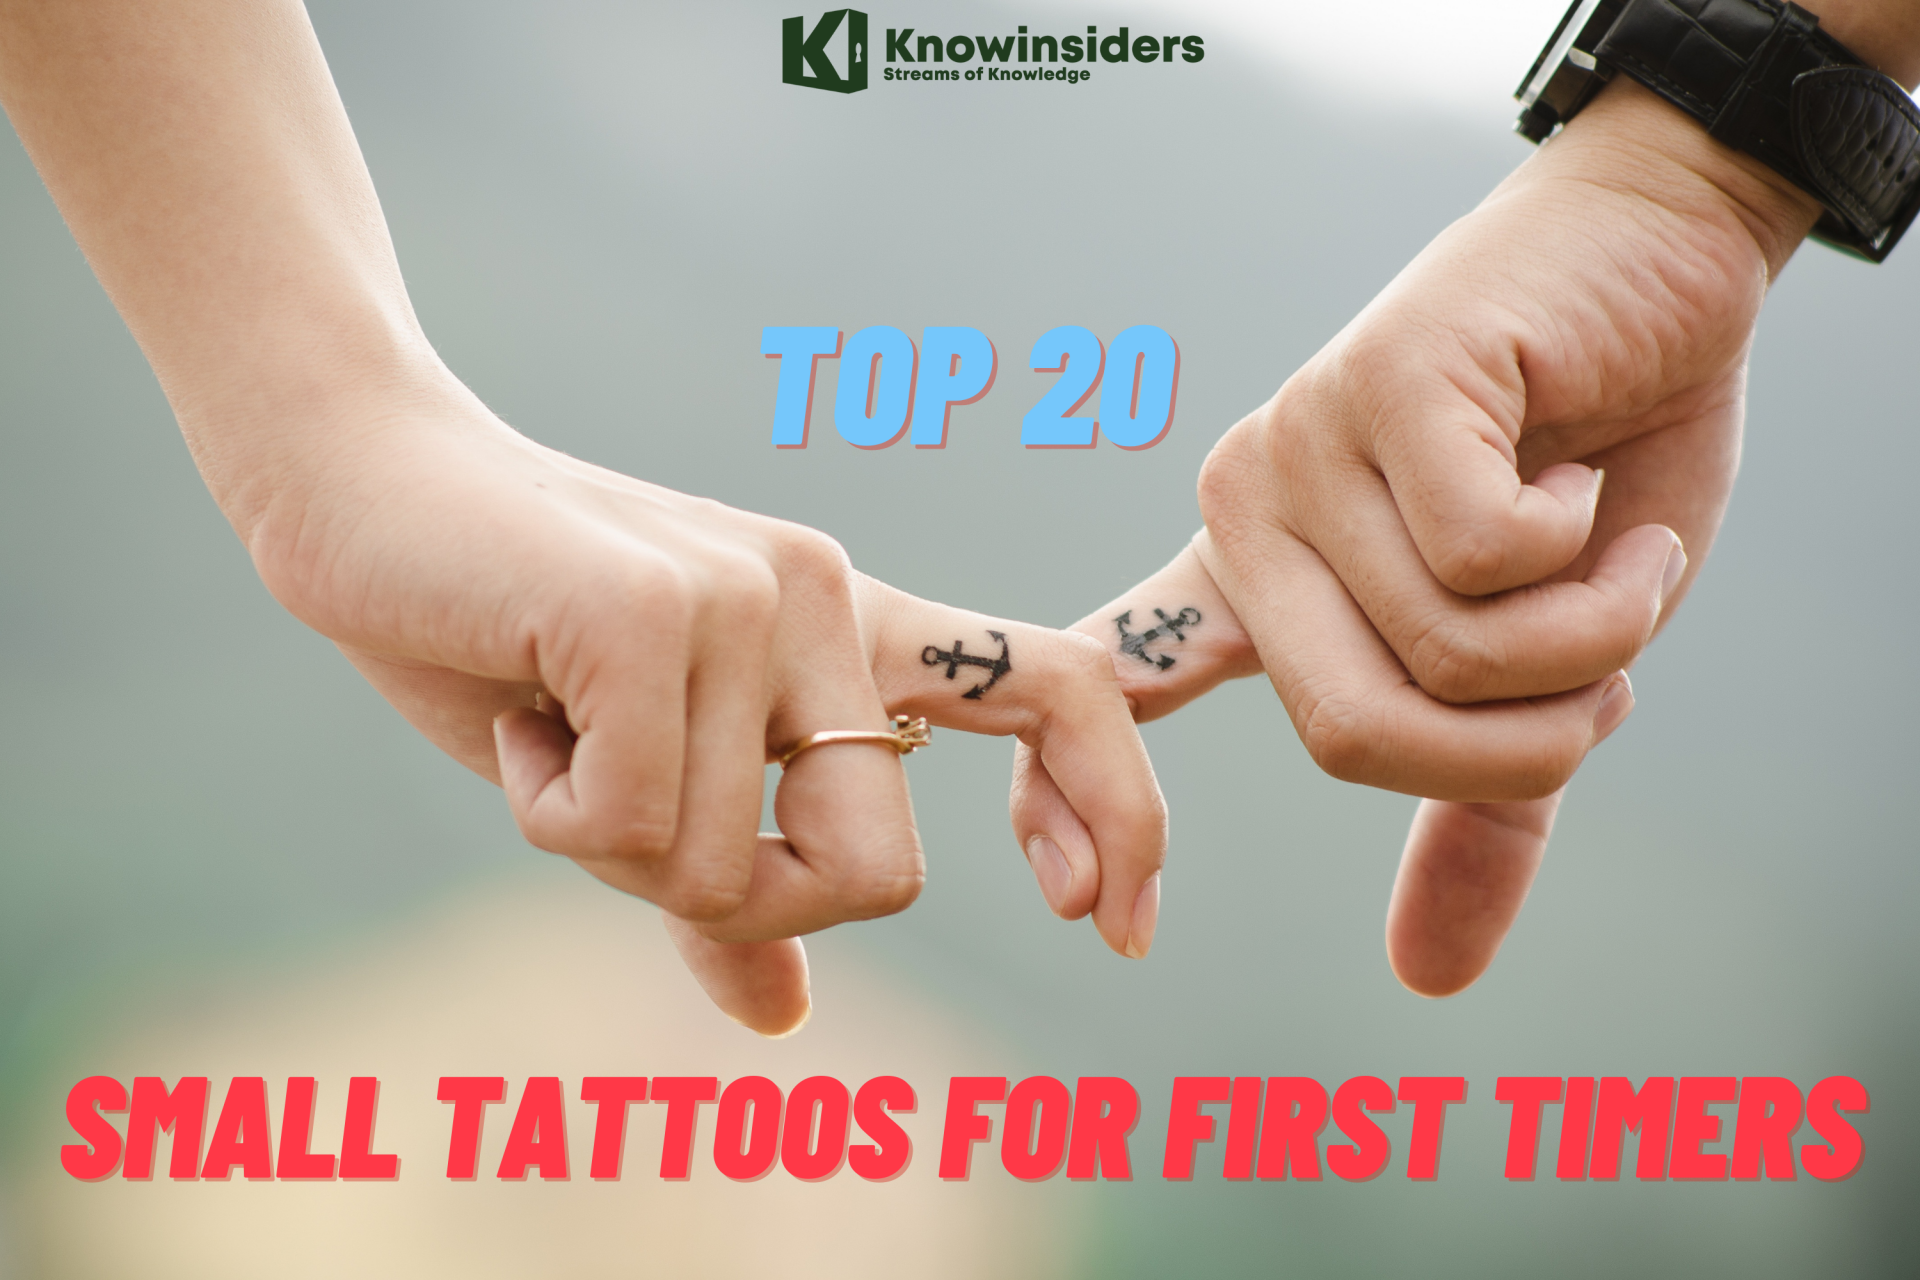 Top 20 Tiny Tattoos for Women/Girls First Time